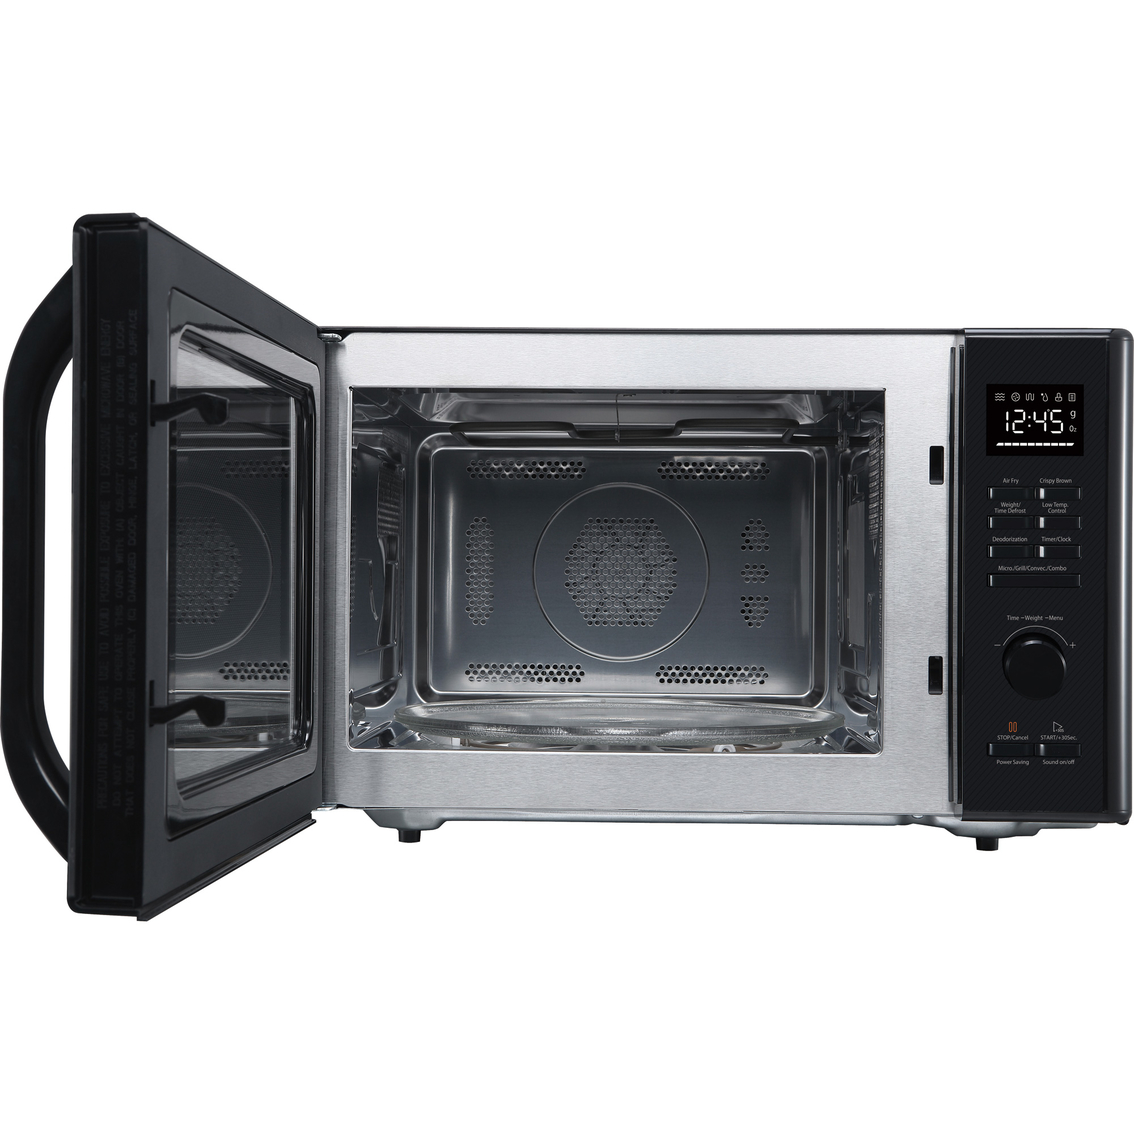 Toshiba 1 Cu. Ft. 6-in-1 Multifunction Versa Microwave Oven 